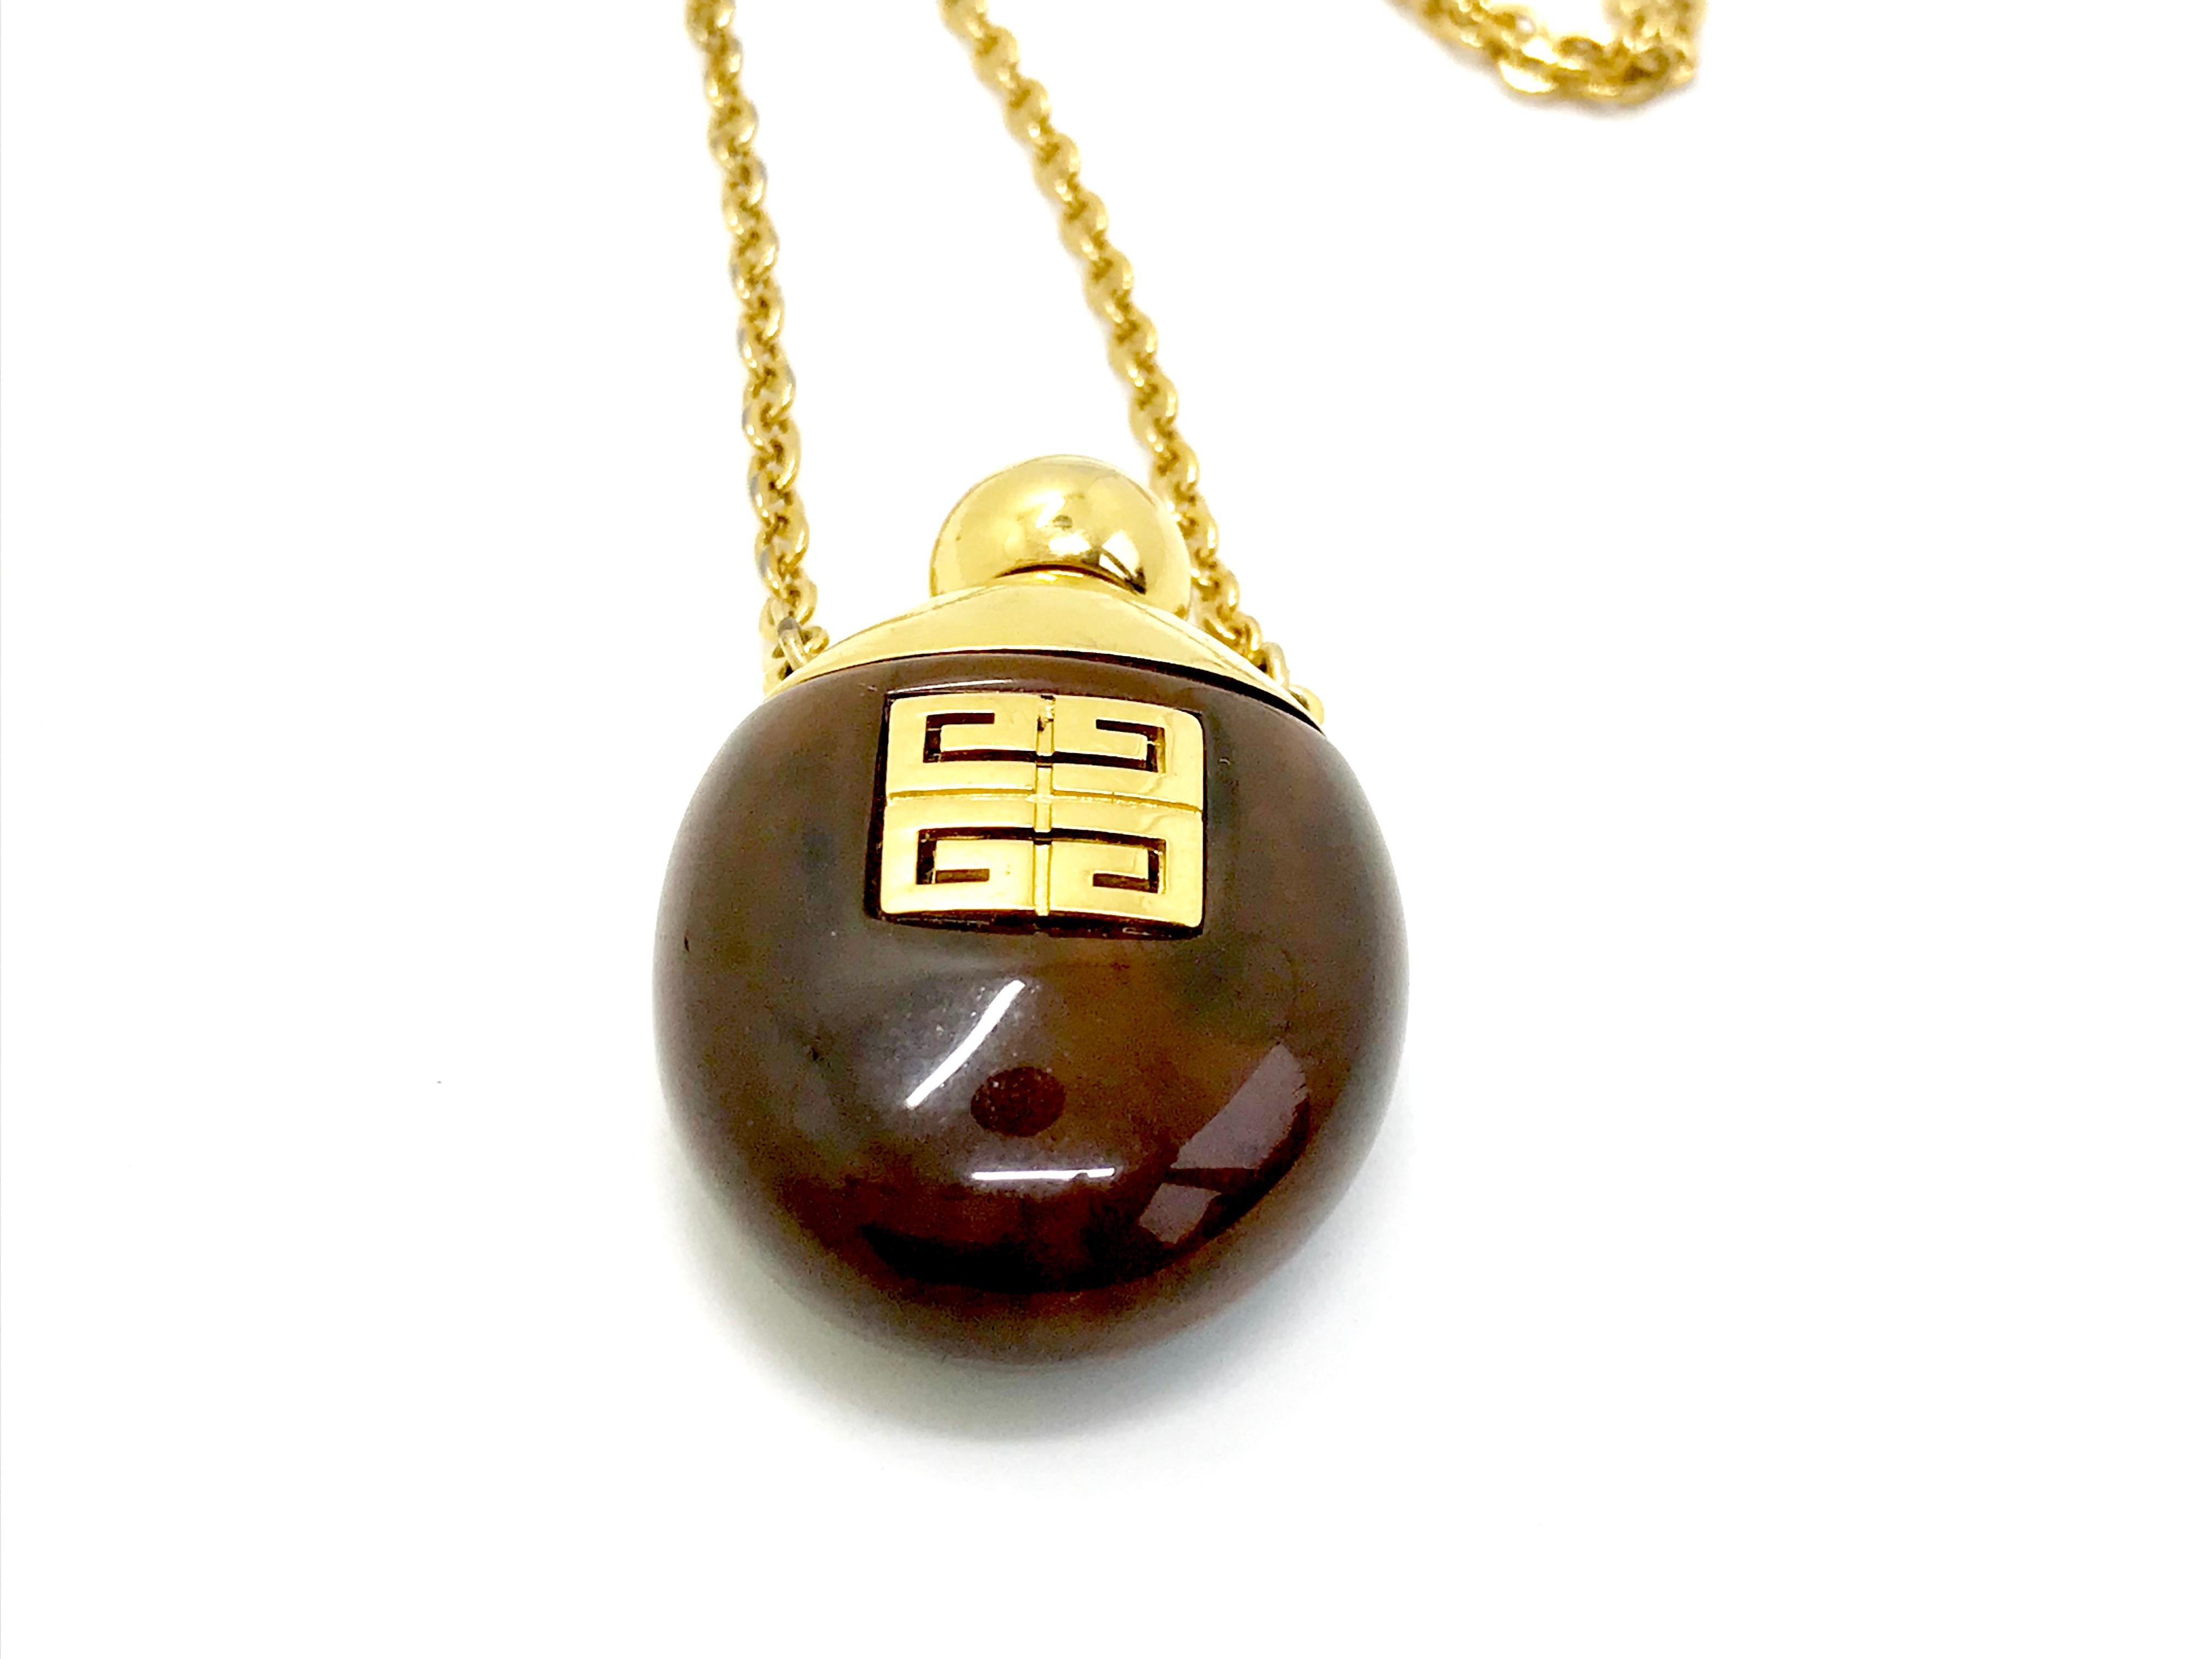 givenchy 1977 necklace